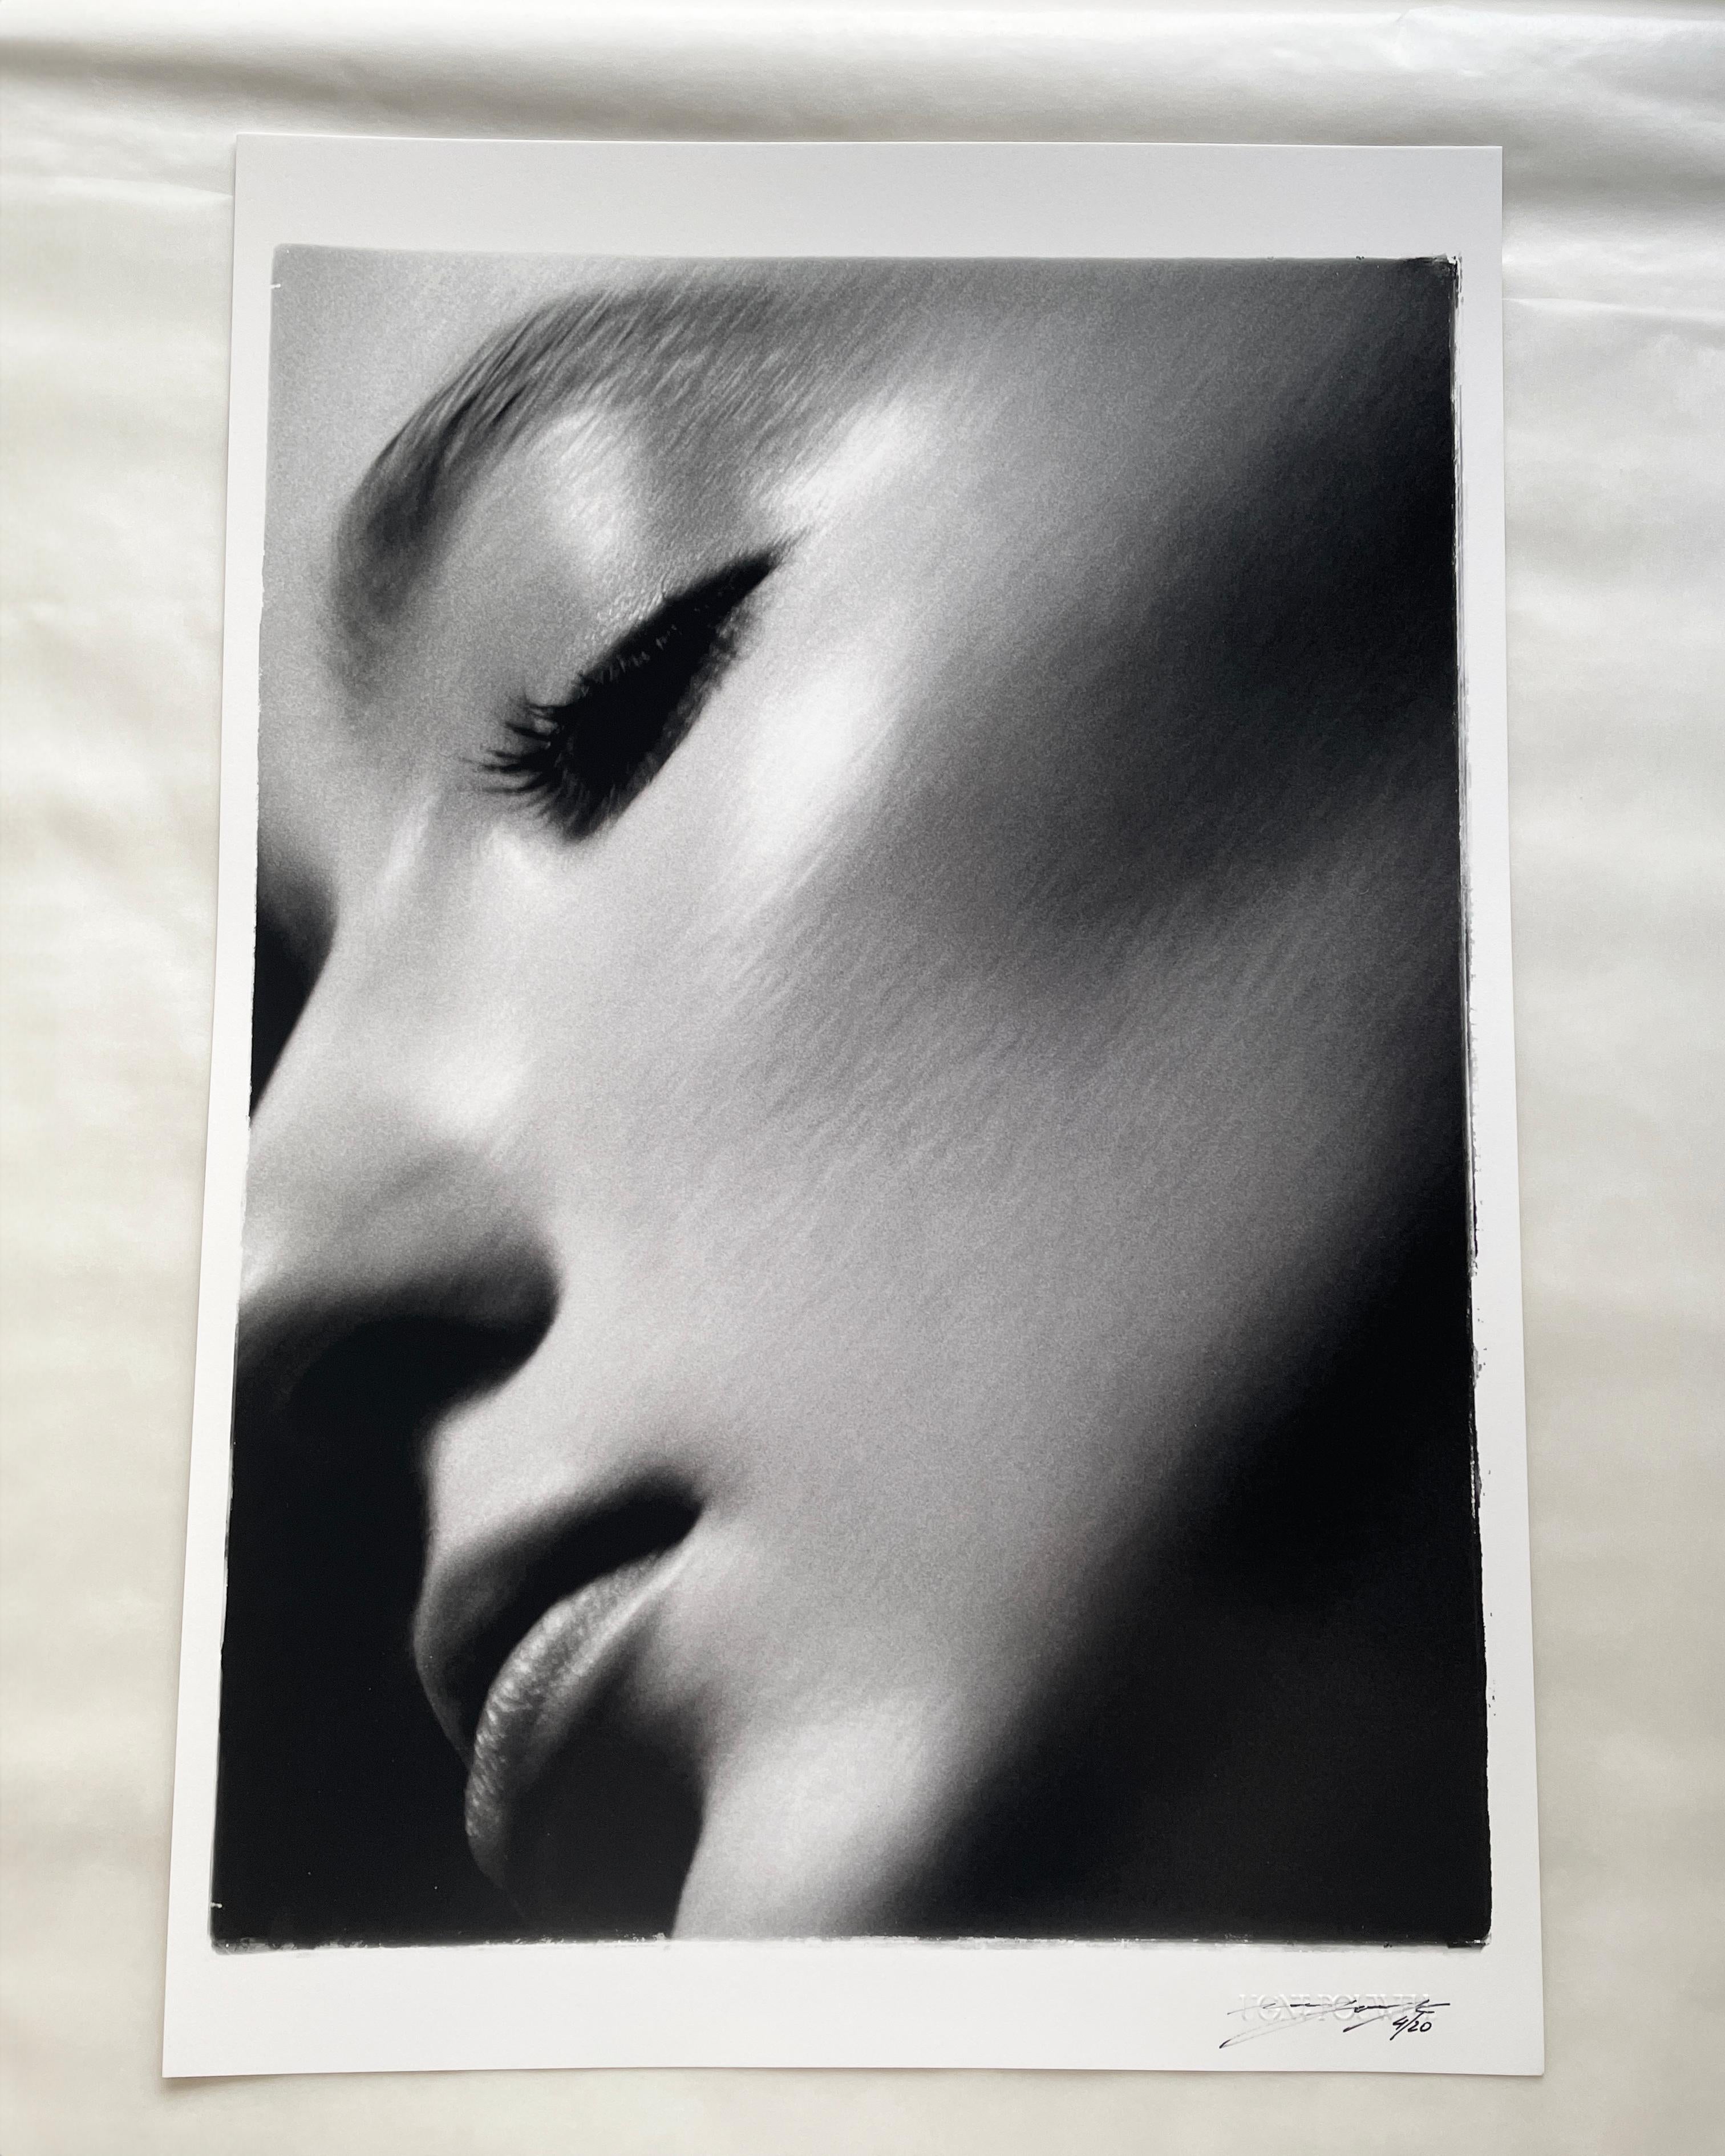 Beauty - black and white close-up female portrait, limited edition of 20 - Contemporary Photograph by Ugne Pouwell